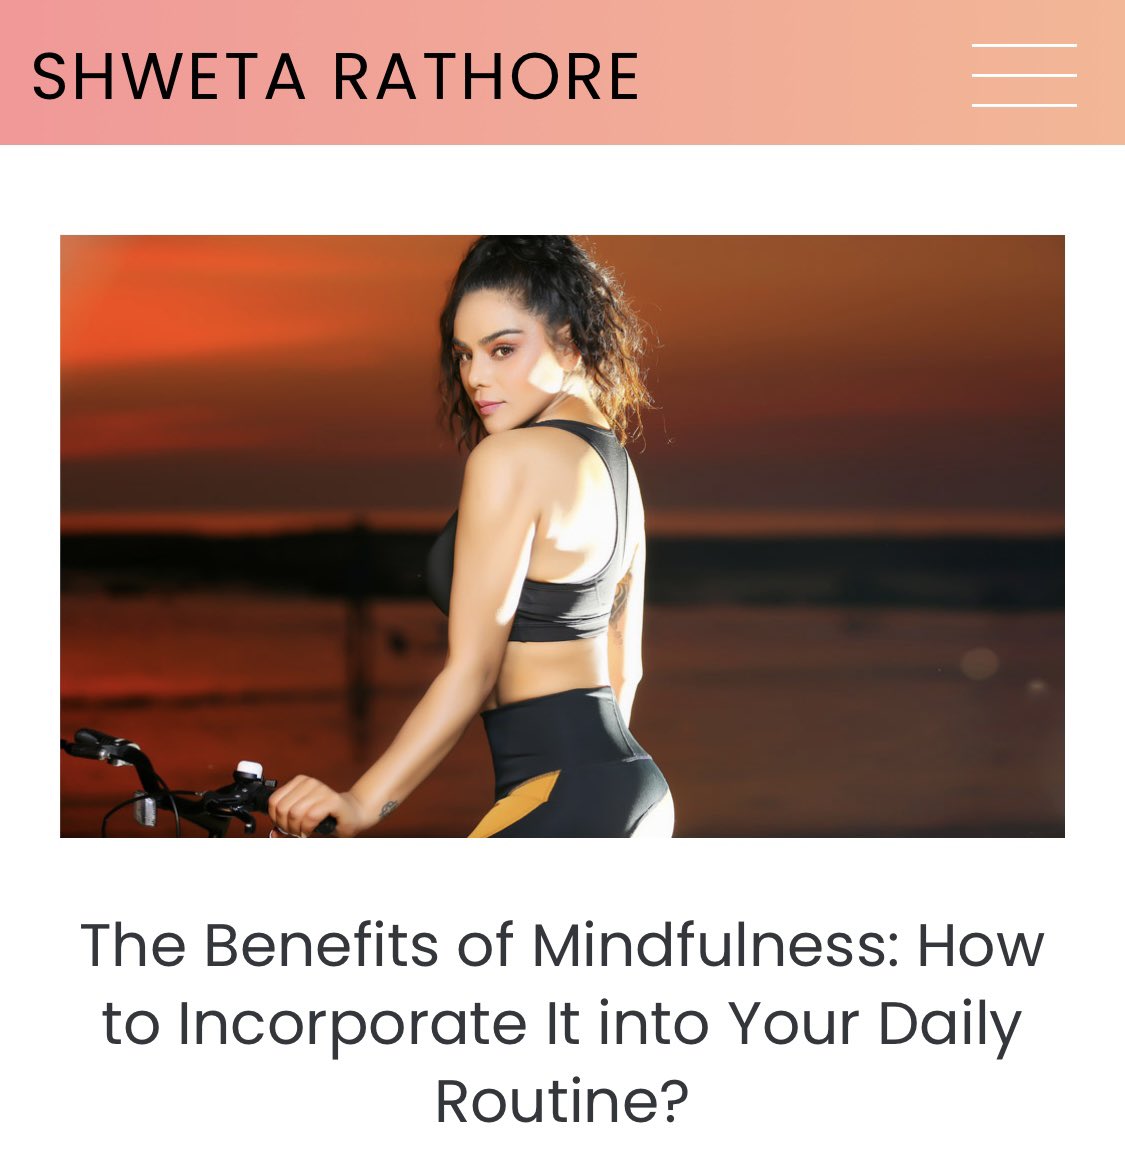 My New Blog ♥️
The Benefits of Mindfulness. How to incorporate it into your daily routine 🧘‍♀️♥️✨

shwetarathore.co.in/blog/the-benef…

shwetarathore.Co.in

#blogbyshwetarathore #befitwithshwetarathore #internationaathlete #worldchampion #SRfit #fitindia #sprituality #ShwetaRathore